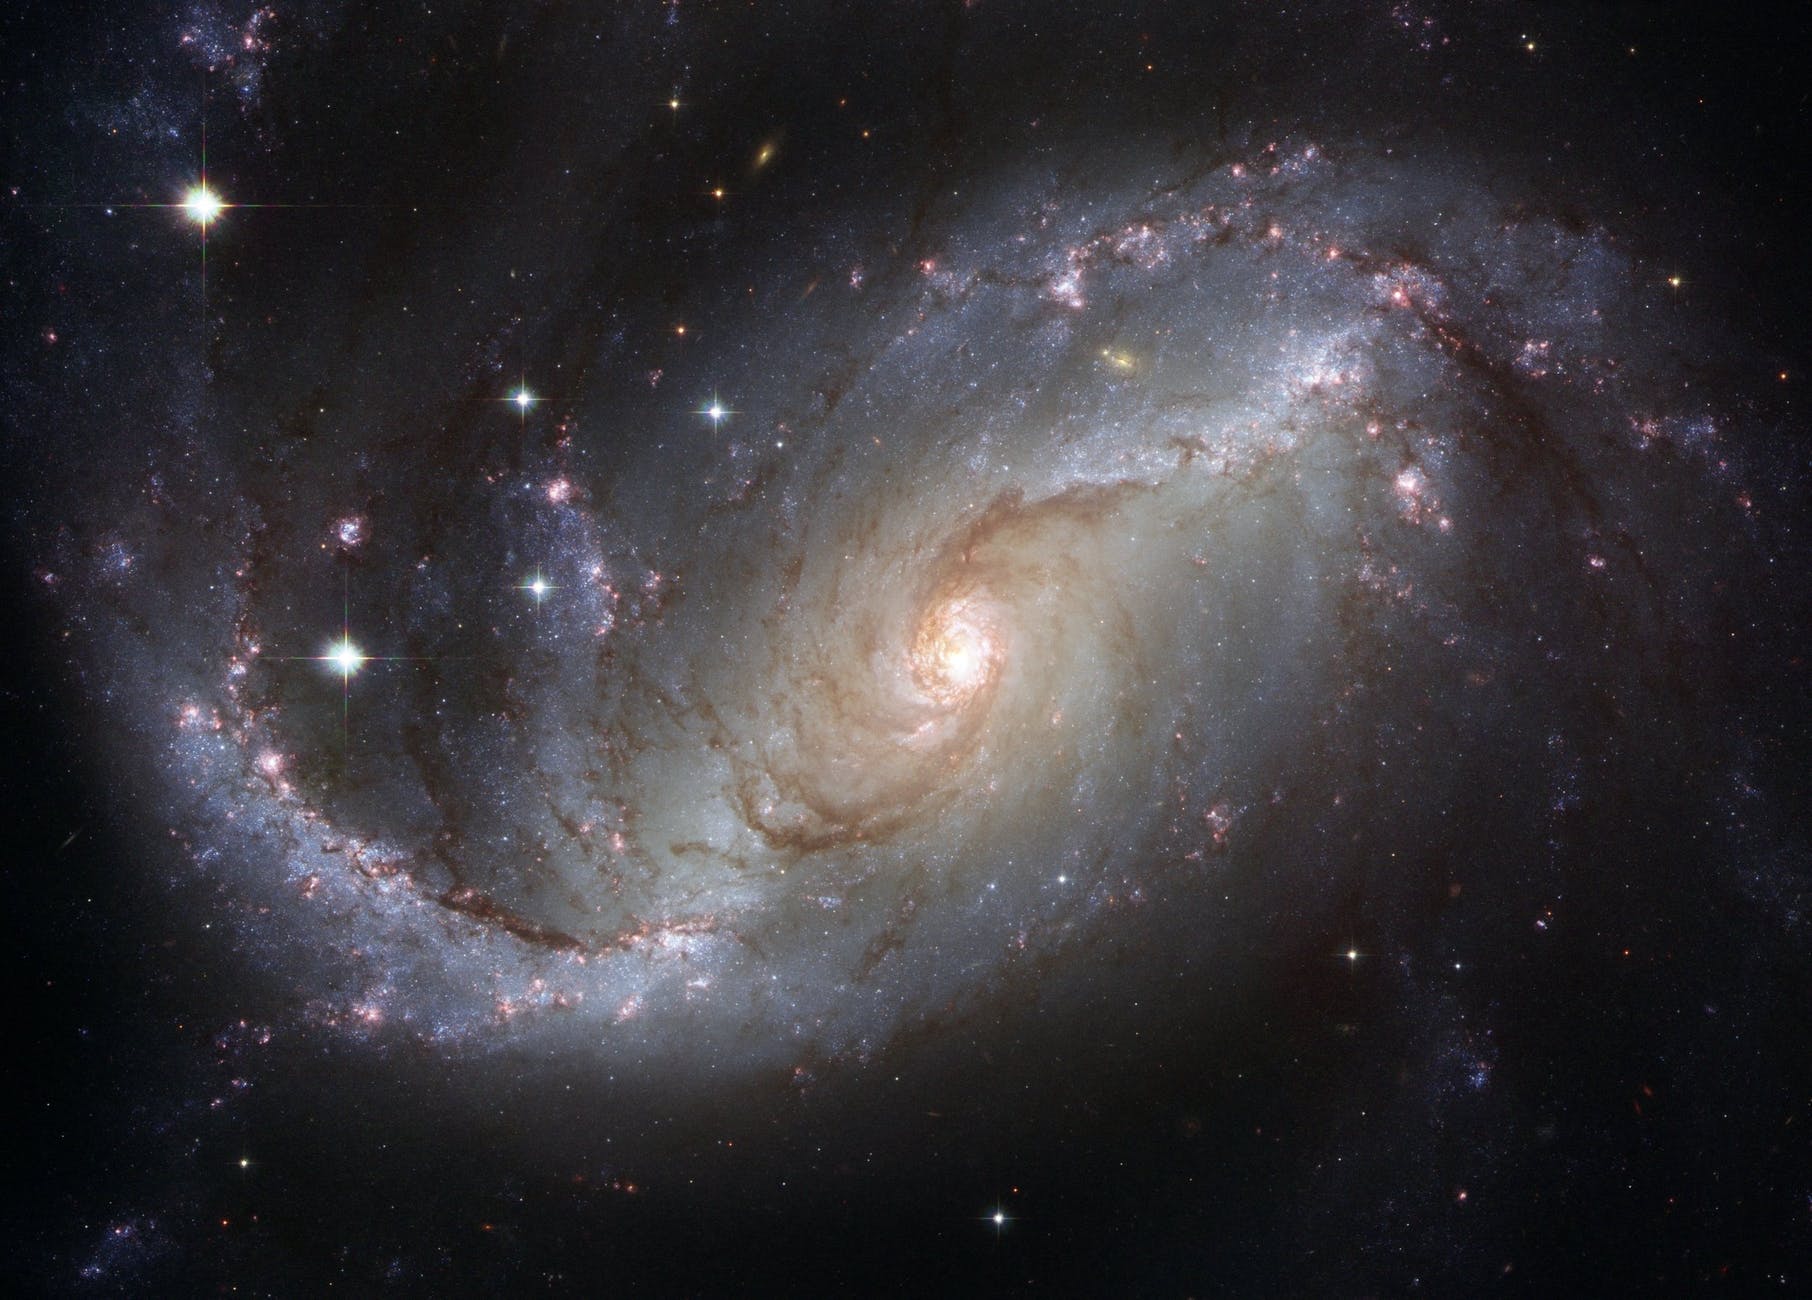 An image of a white and cream-colored spiral galaxy spangled with stars in the black, perhaps our own Milky Way.